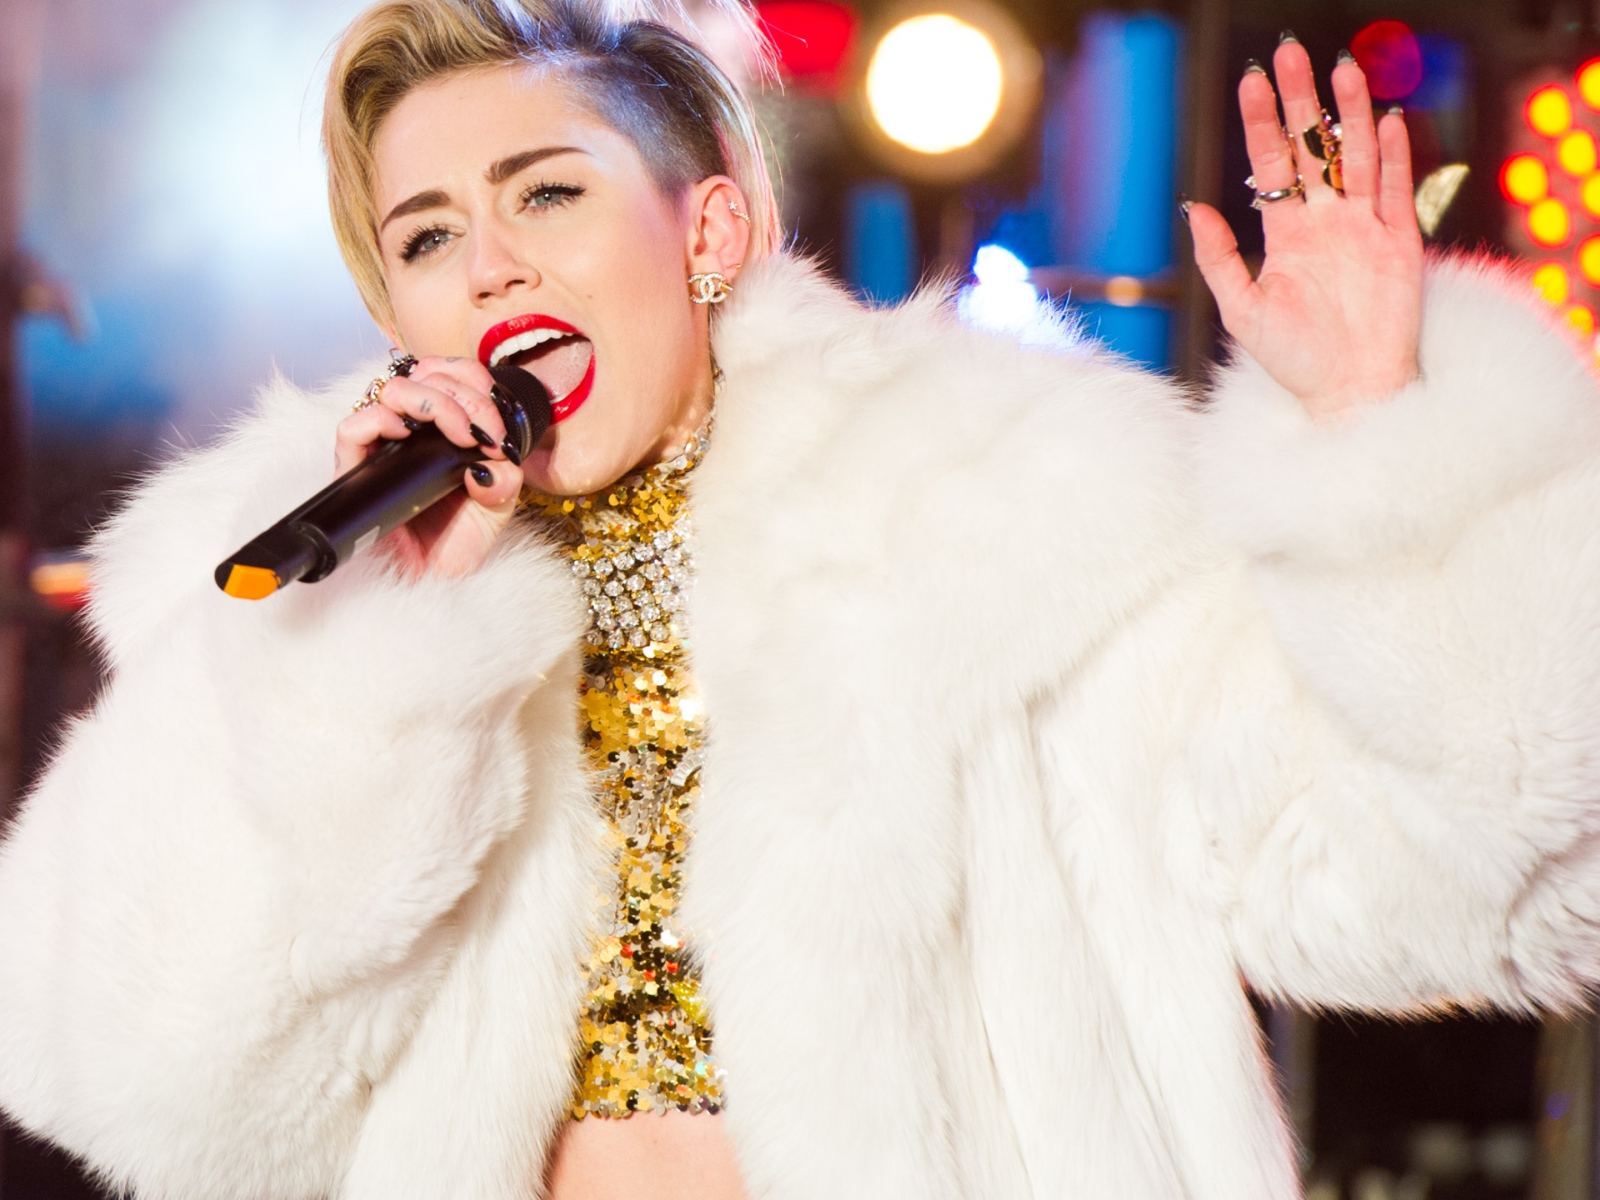 Popular young singer Miley Cyrus in a white fur coat on stage